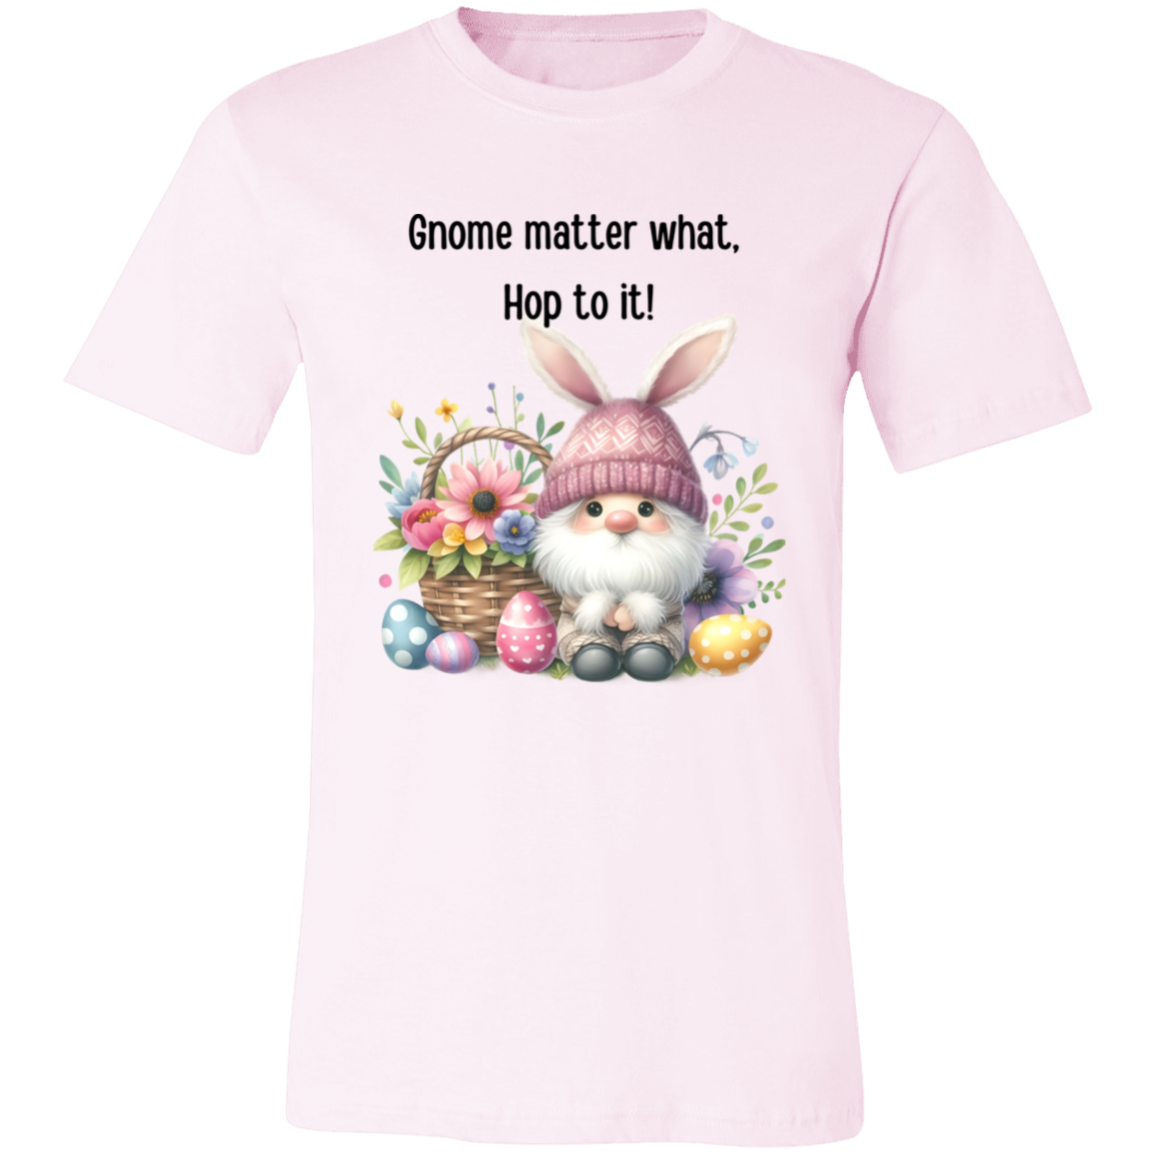 Gnome matter what. Hop to it! T-shirt Short sleeve, easter gnome, funny shirt unisex